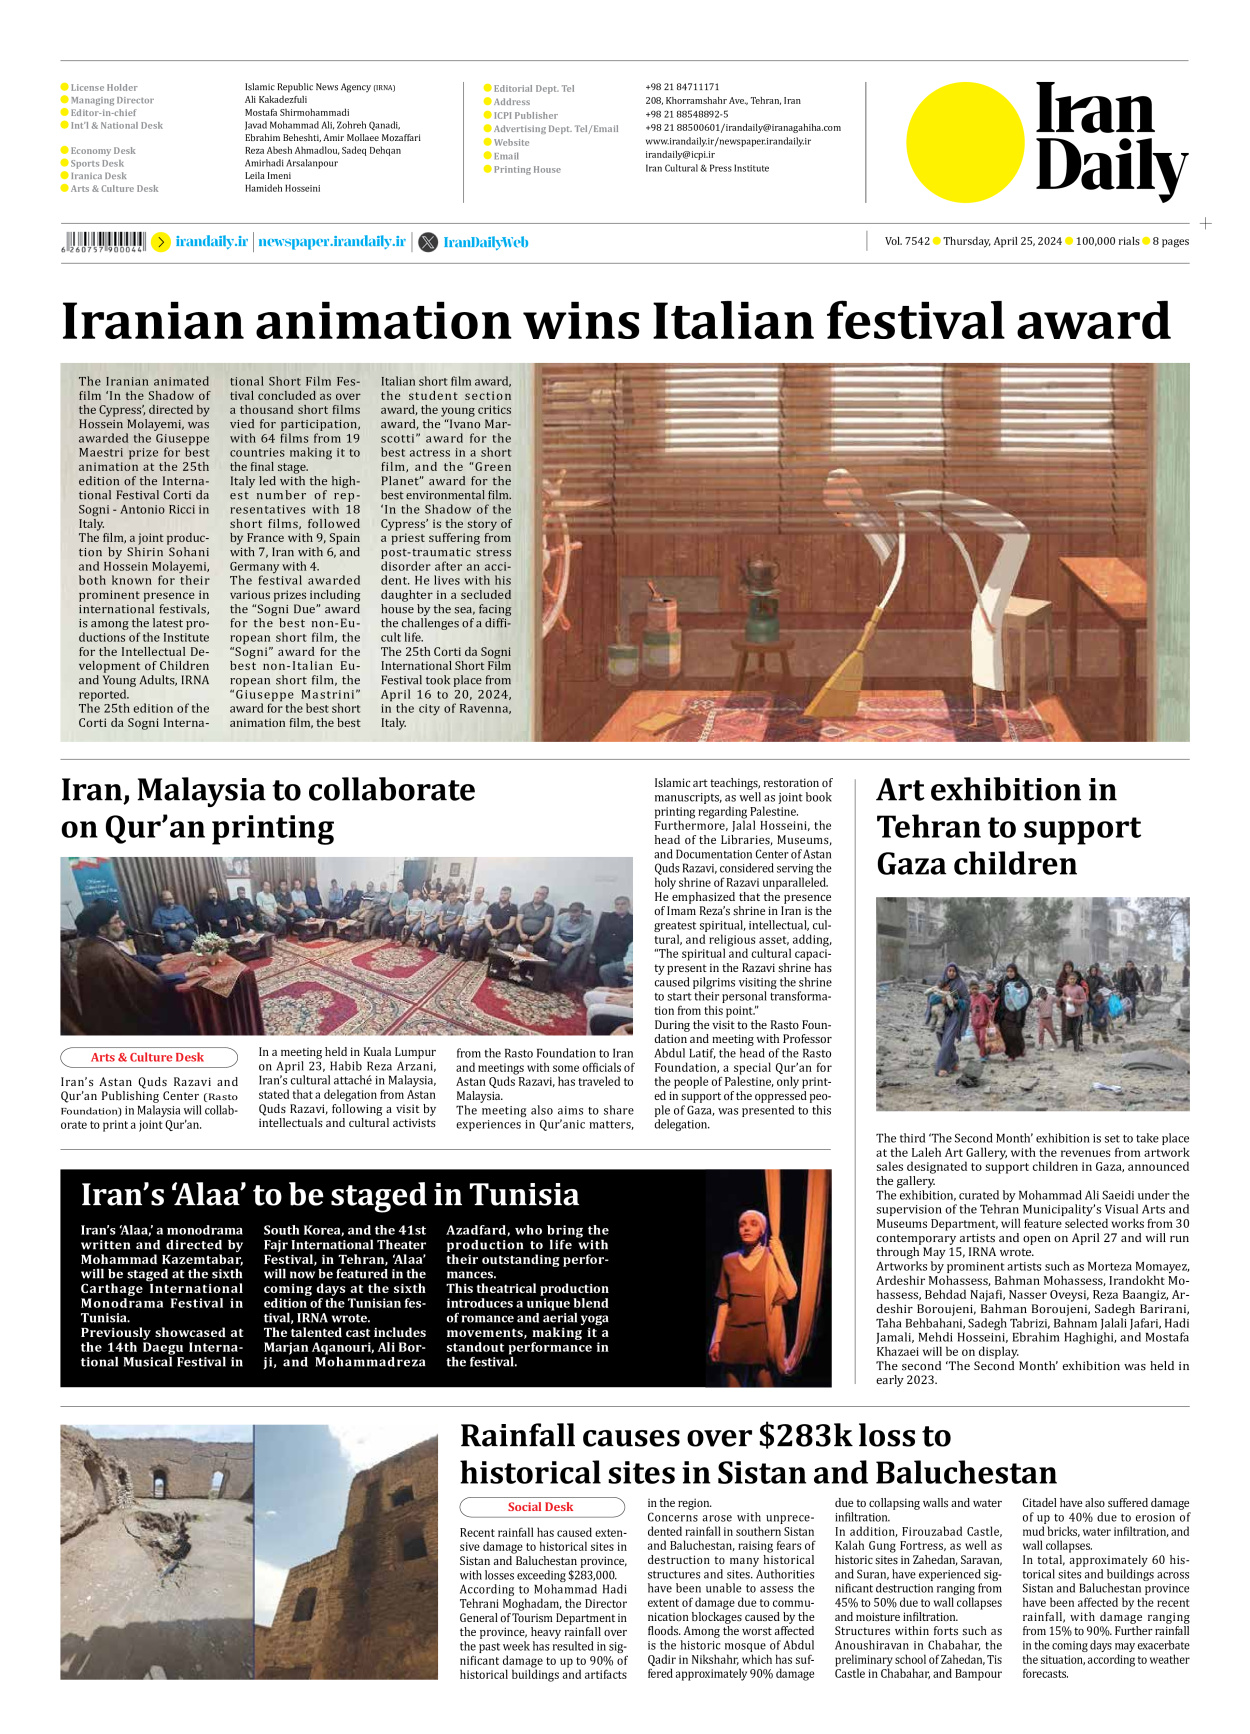 Iran Daily - Number Seven Thousand Five Hundred and Forty Two - 25 April 2024 - Page 8